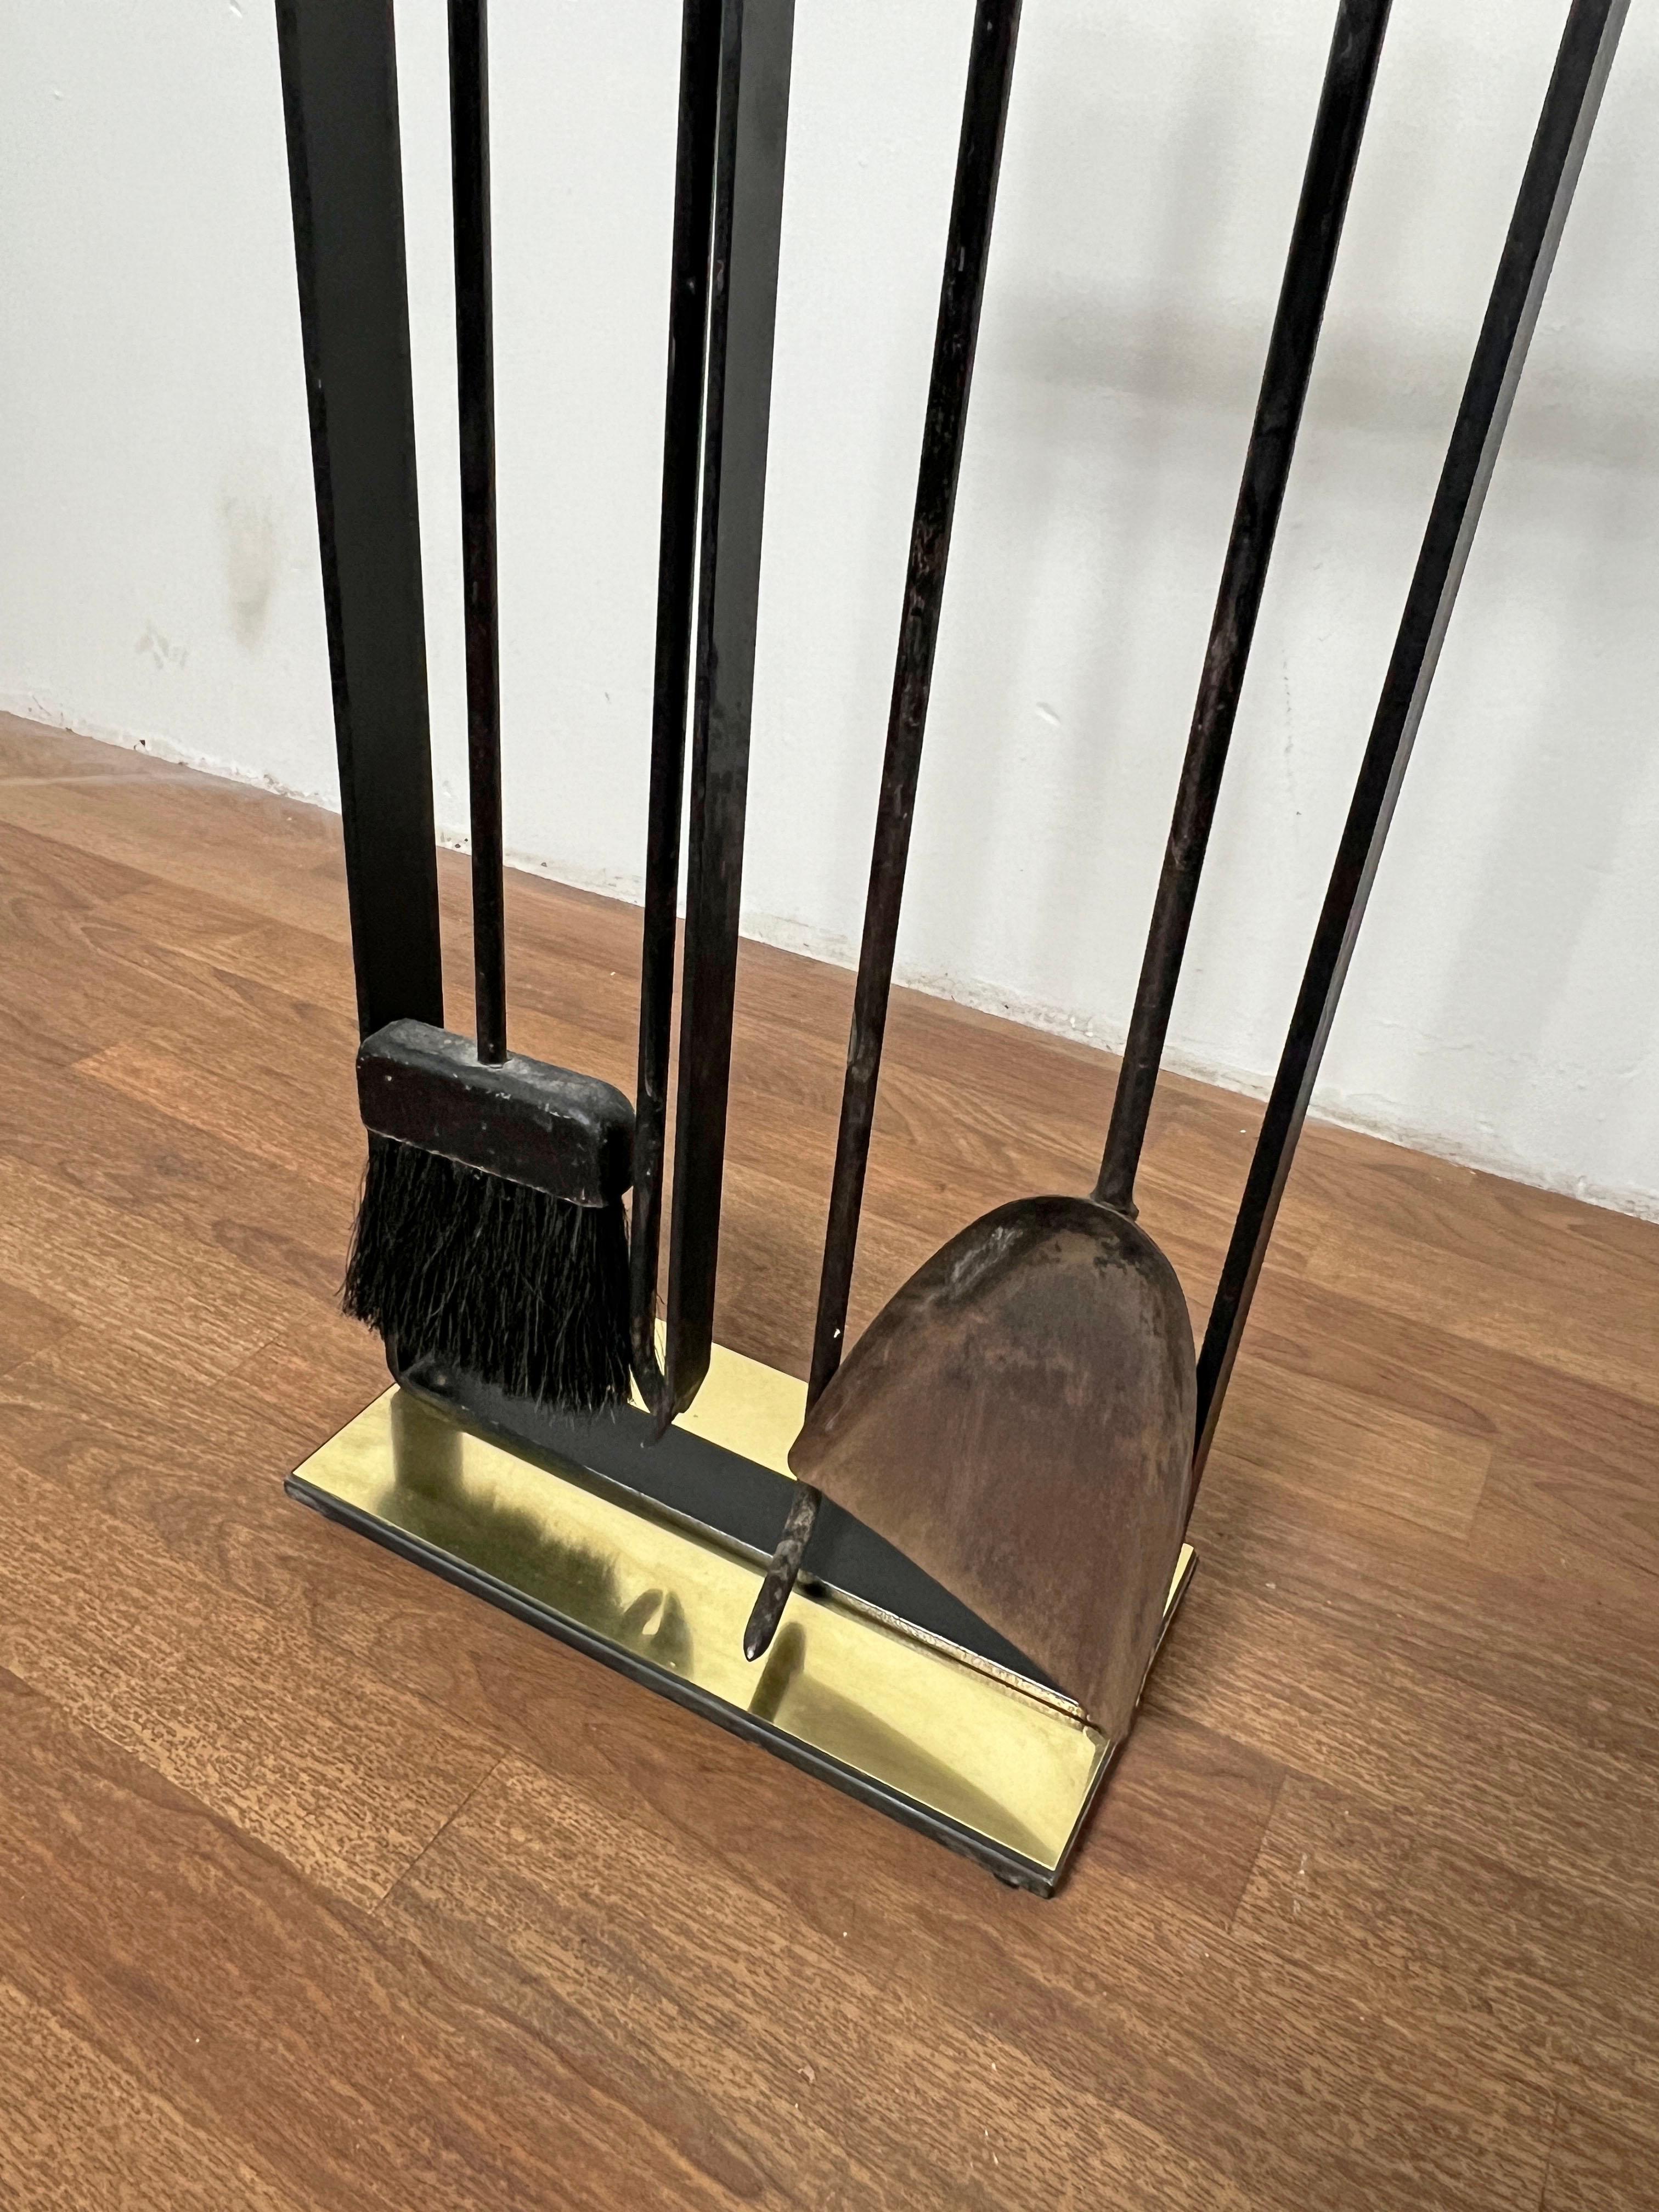 American Set of Modernist Pilgrim Mfg. Brass and Wrought Iron Fireplace Tools Circa 1960s For Sale